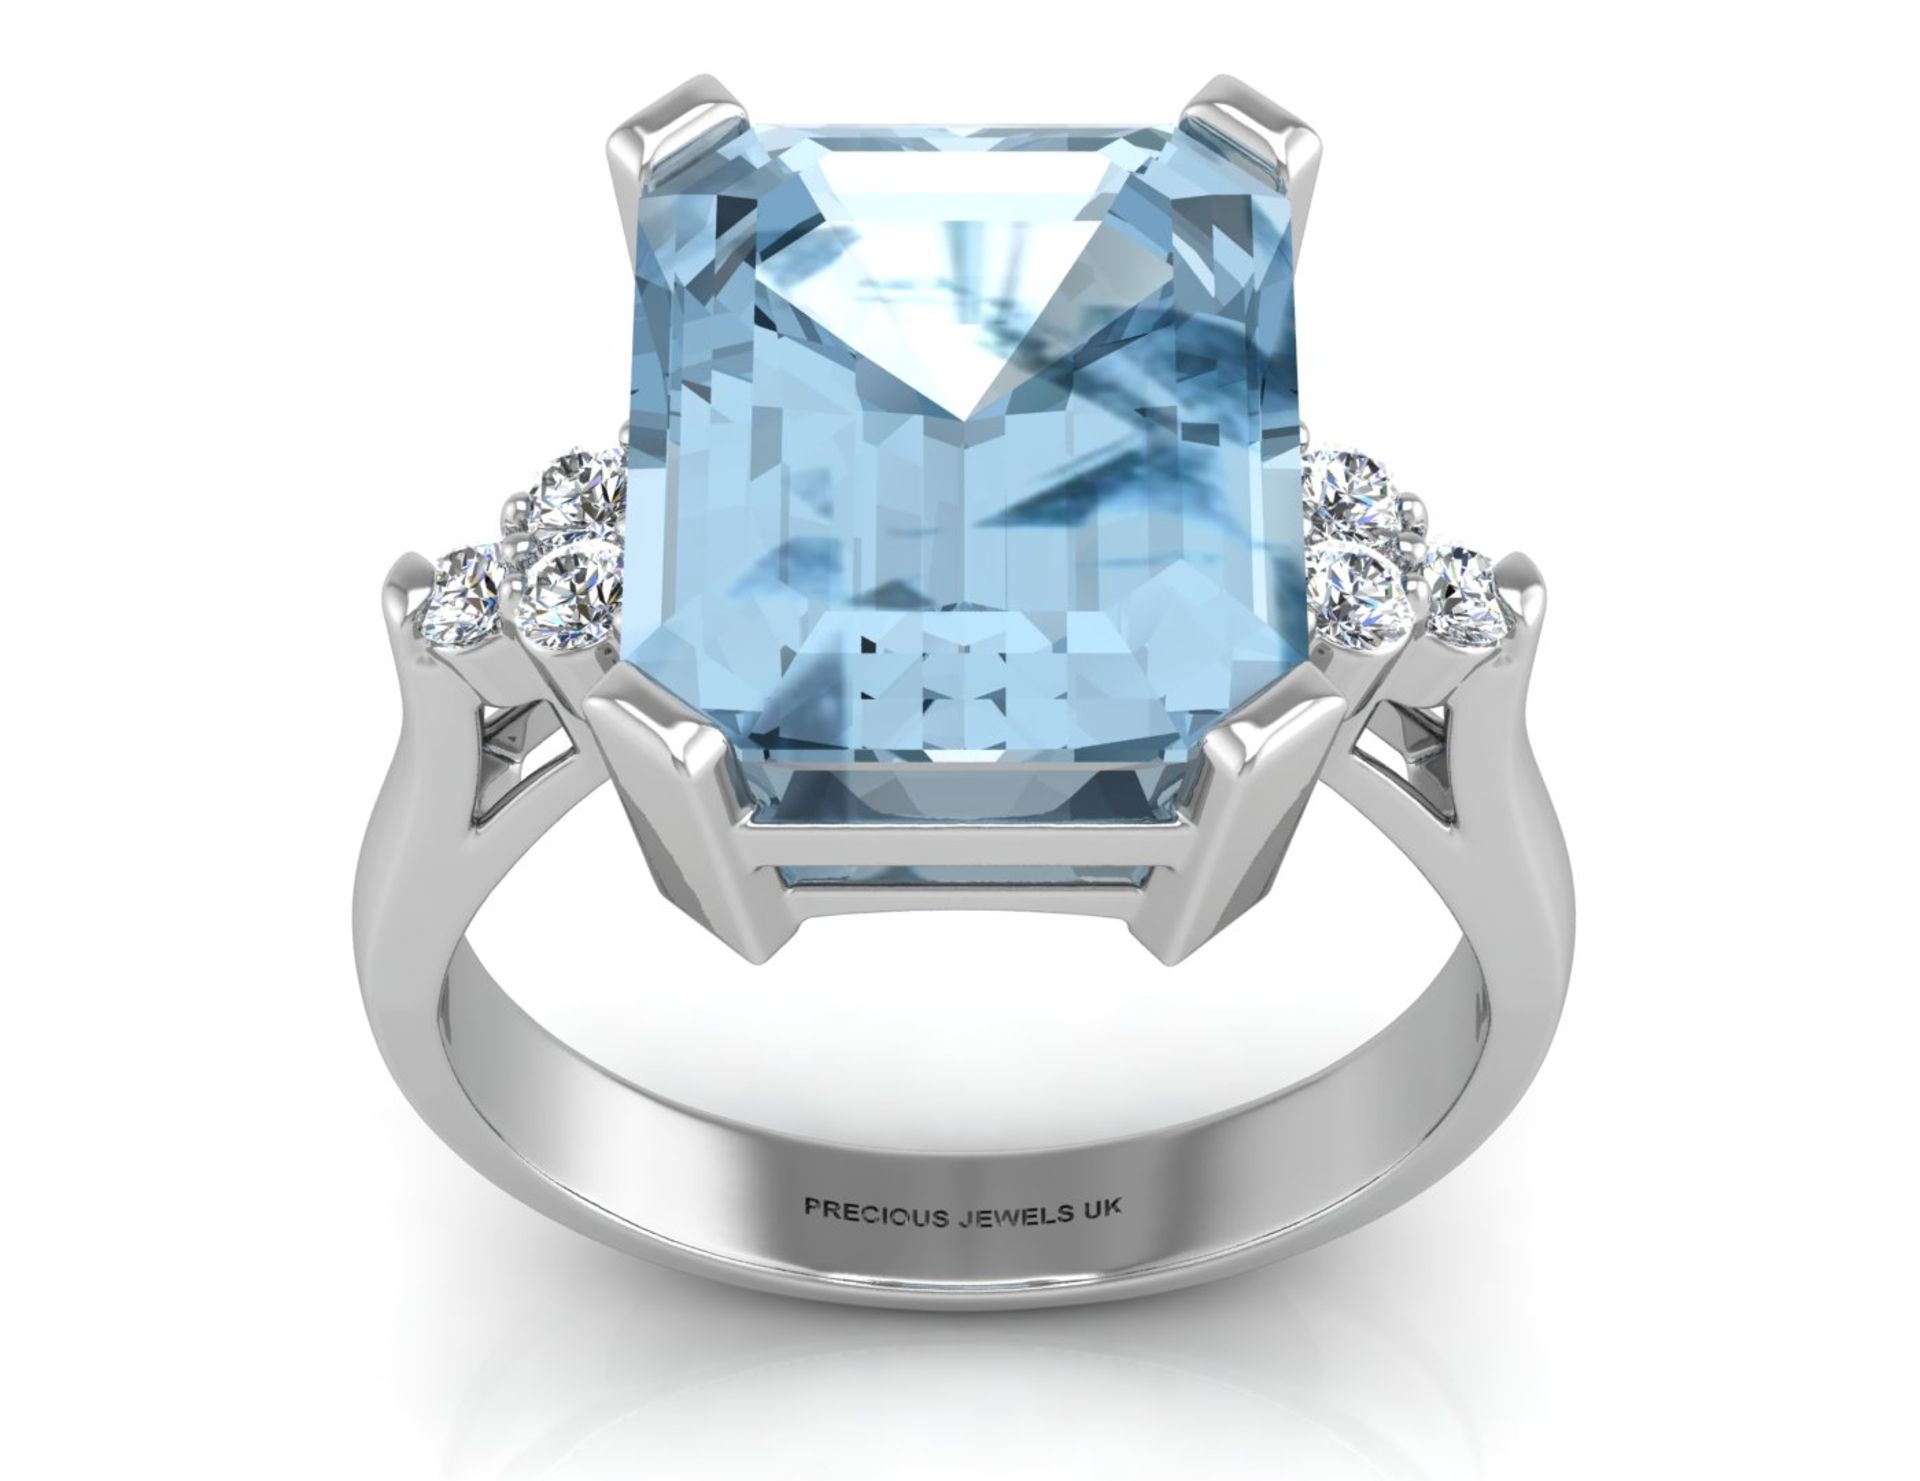 9ct White Gold Diamond And Blue Topaz Ring 0.18 Carats - Valued by AGI £1,645.00 - This stunning - Image 3 of 4